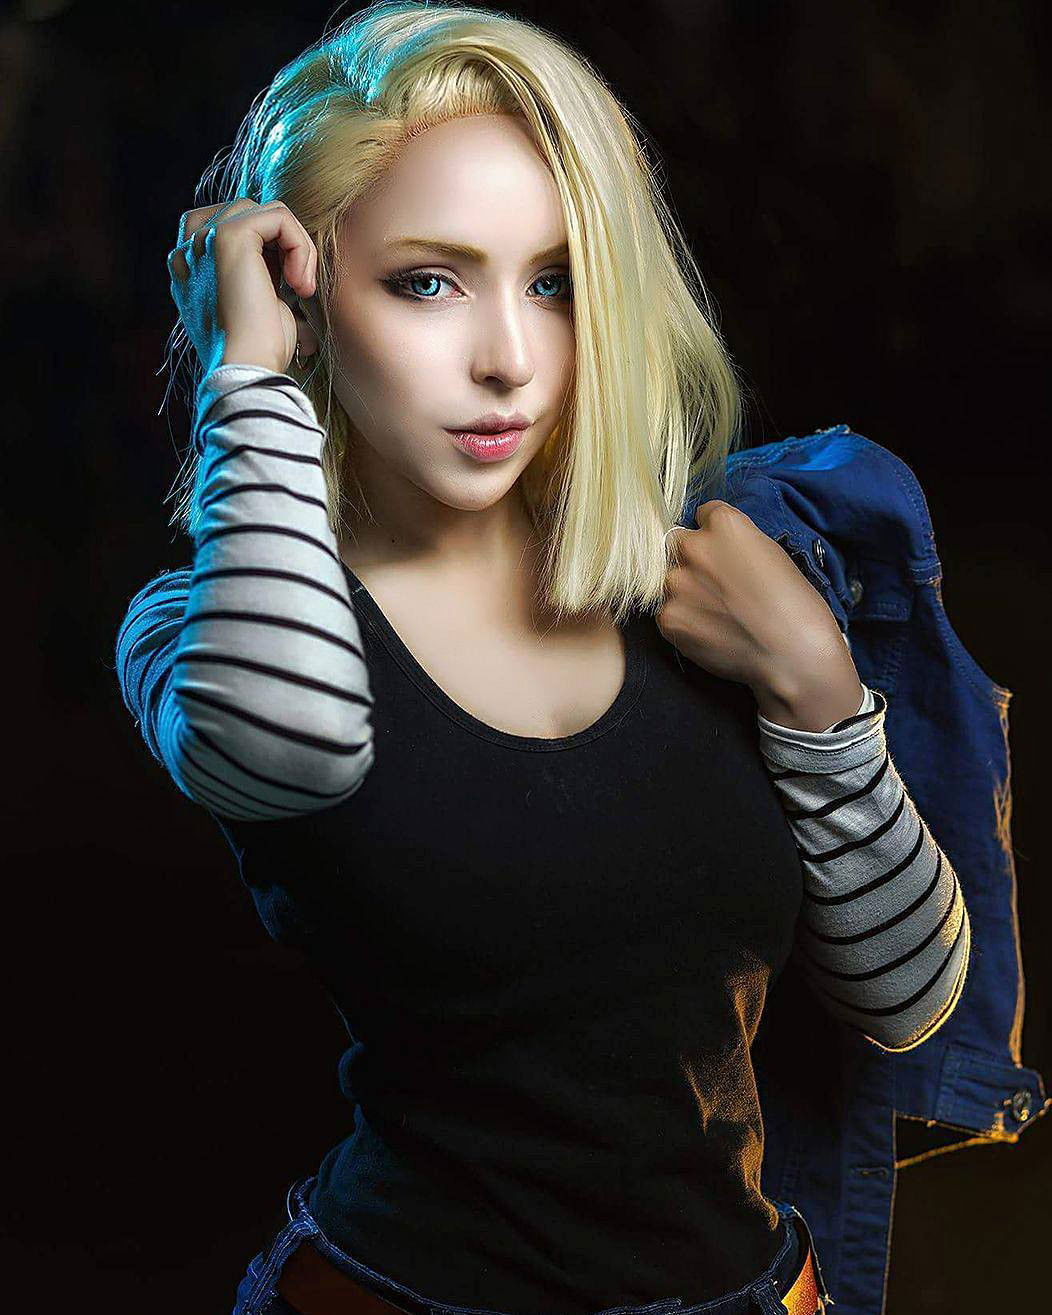 Watch the Photo by Sunsura with the username @Sunsura, posted on March 1, 2018 and the text says '#dbz  #dragonballz  #android18  #c18  #Cosplay  #cosplaygirl  #cute'